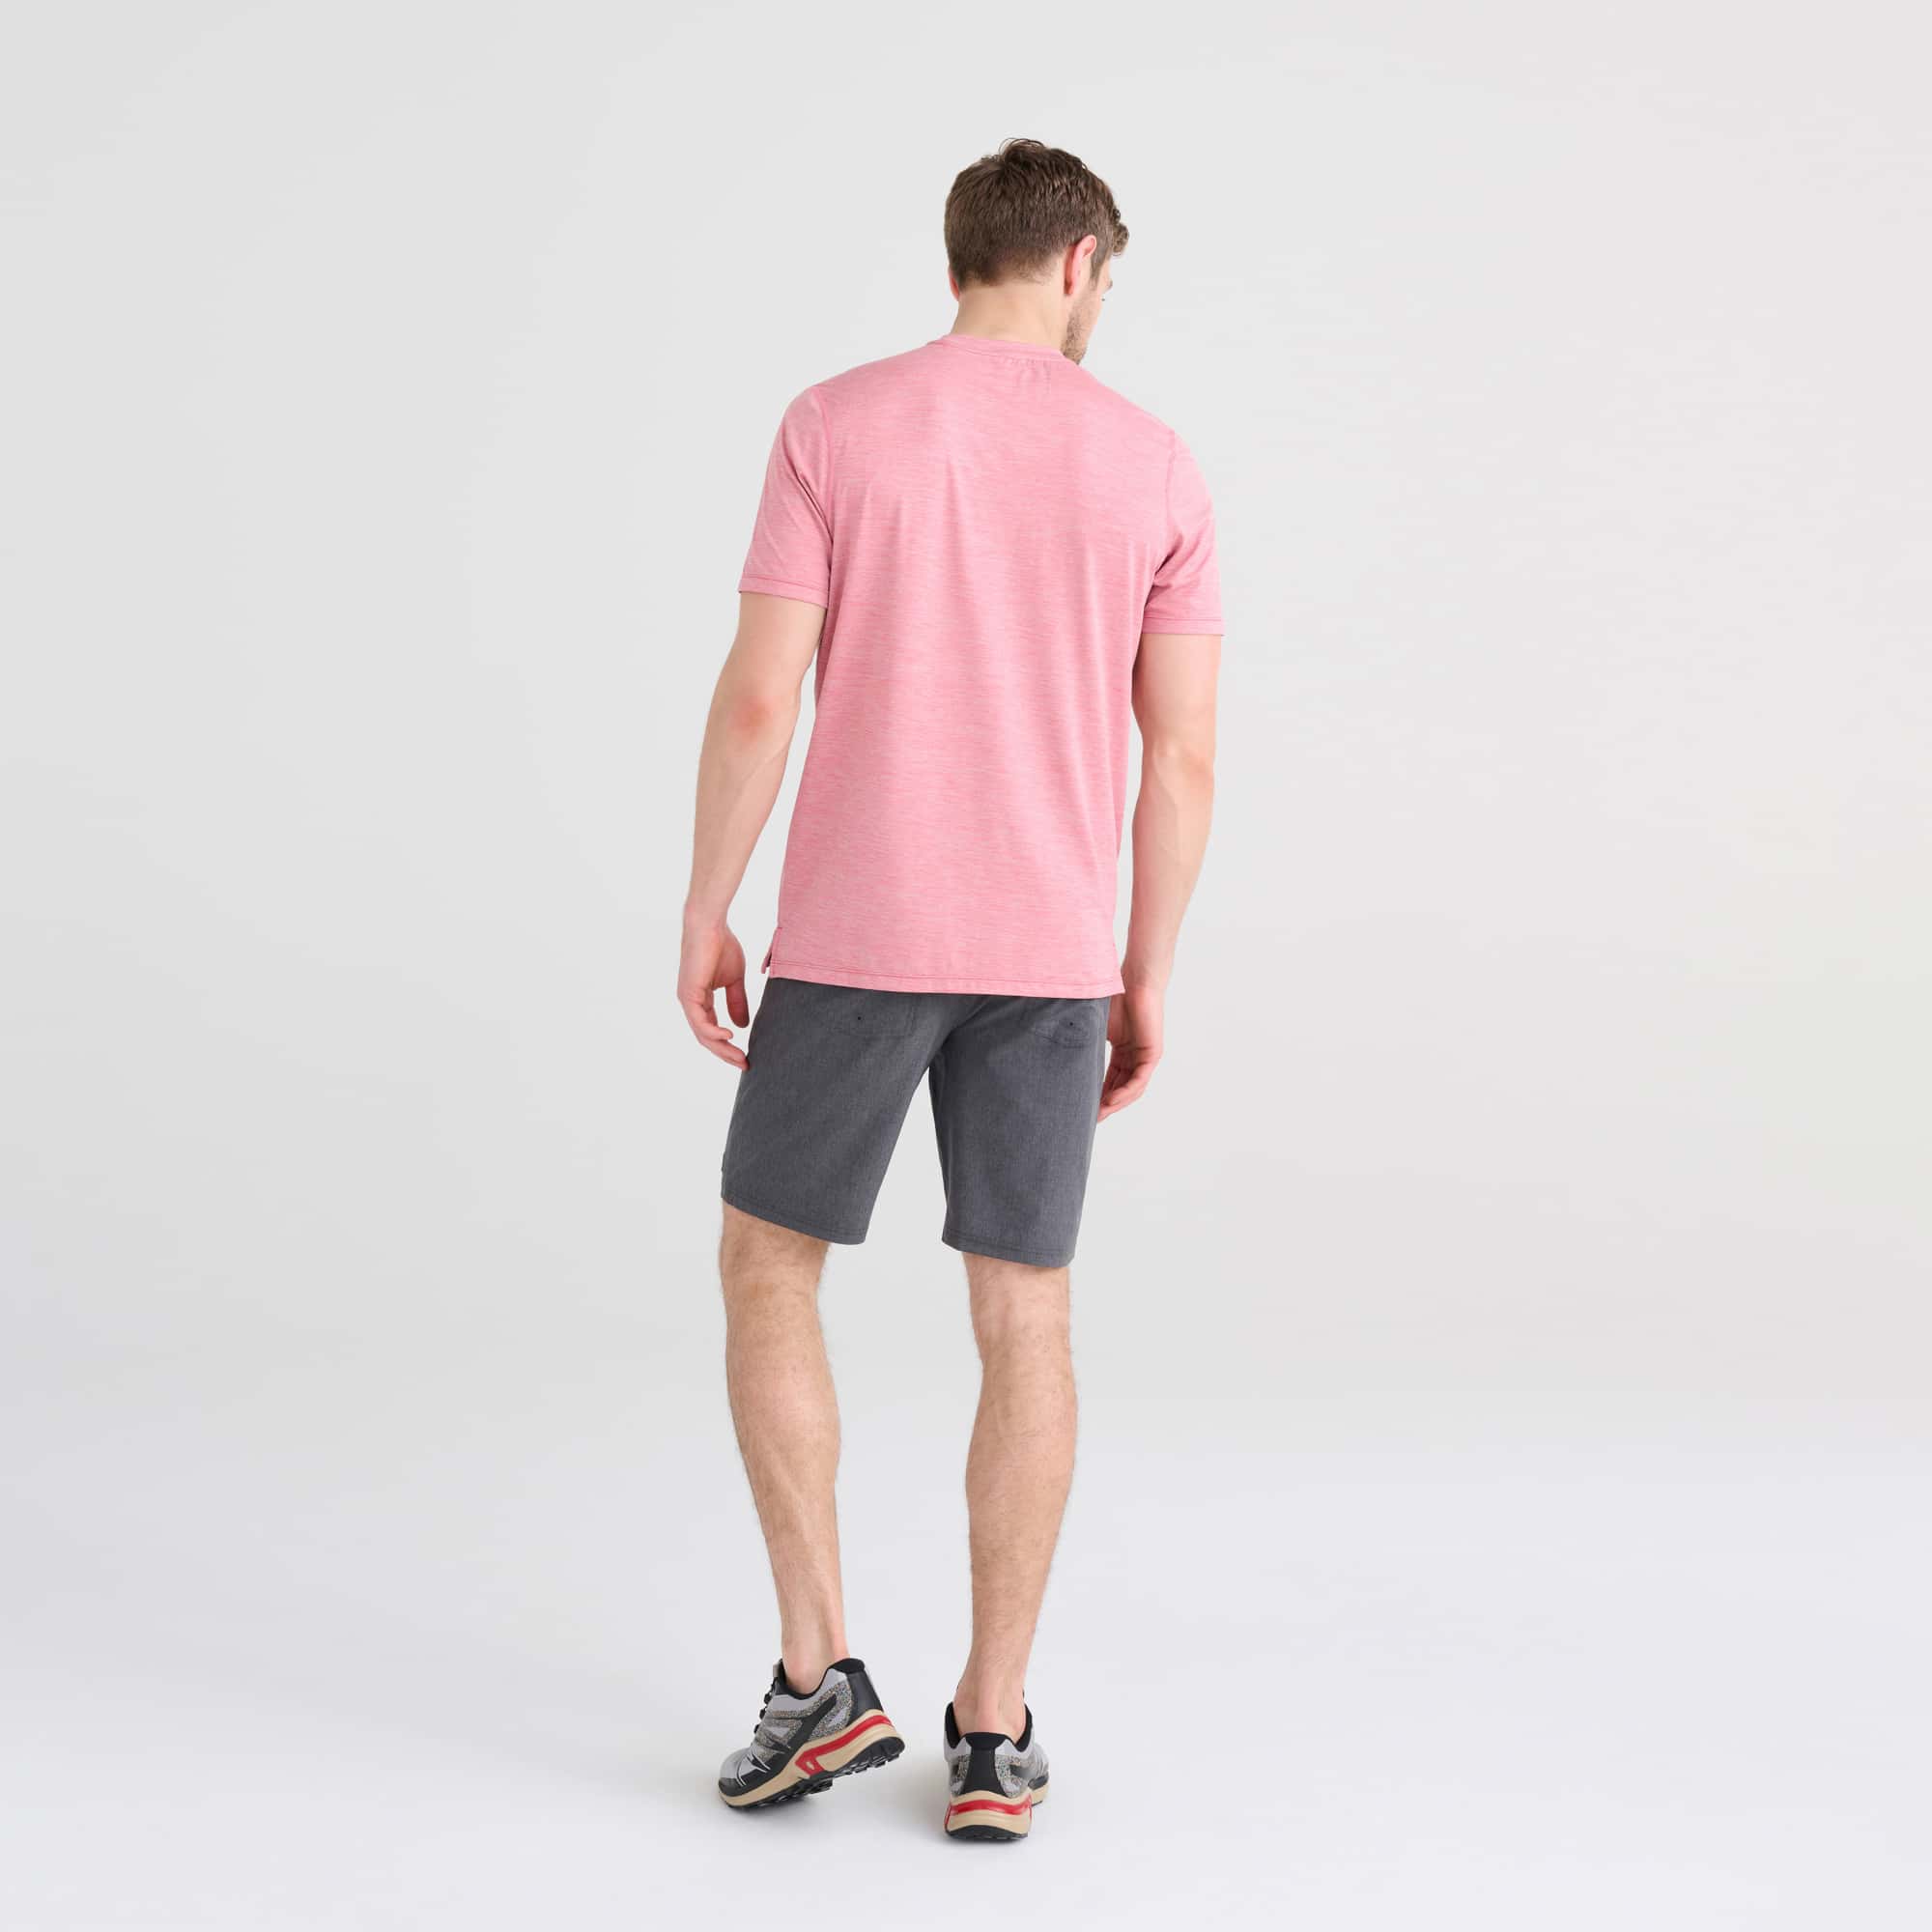 Back - Model wearing DropTemp All Day Cooling Short Sleeve Tee in Gumball Heather